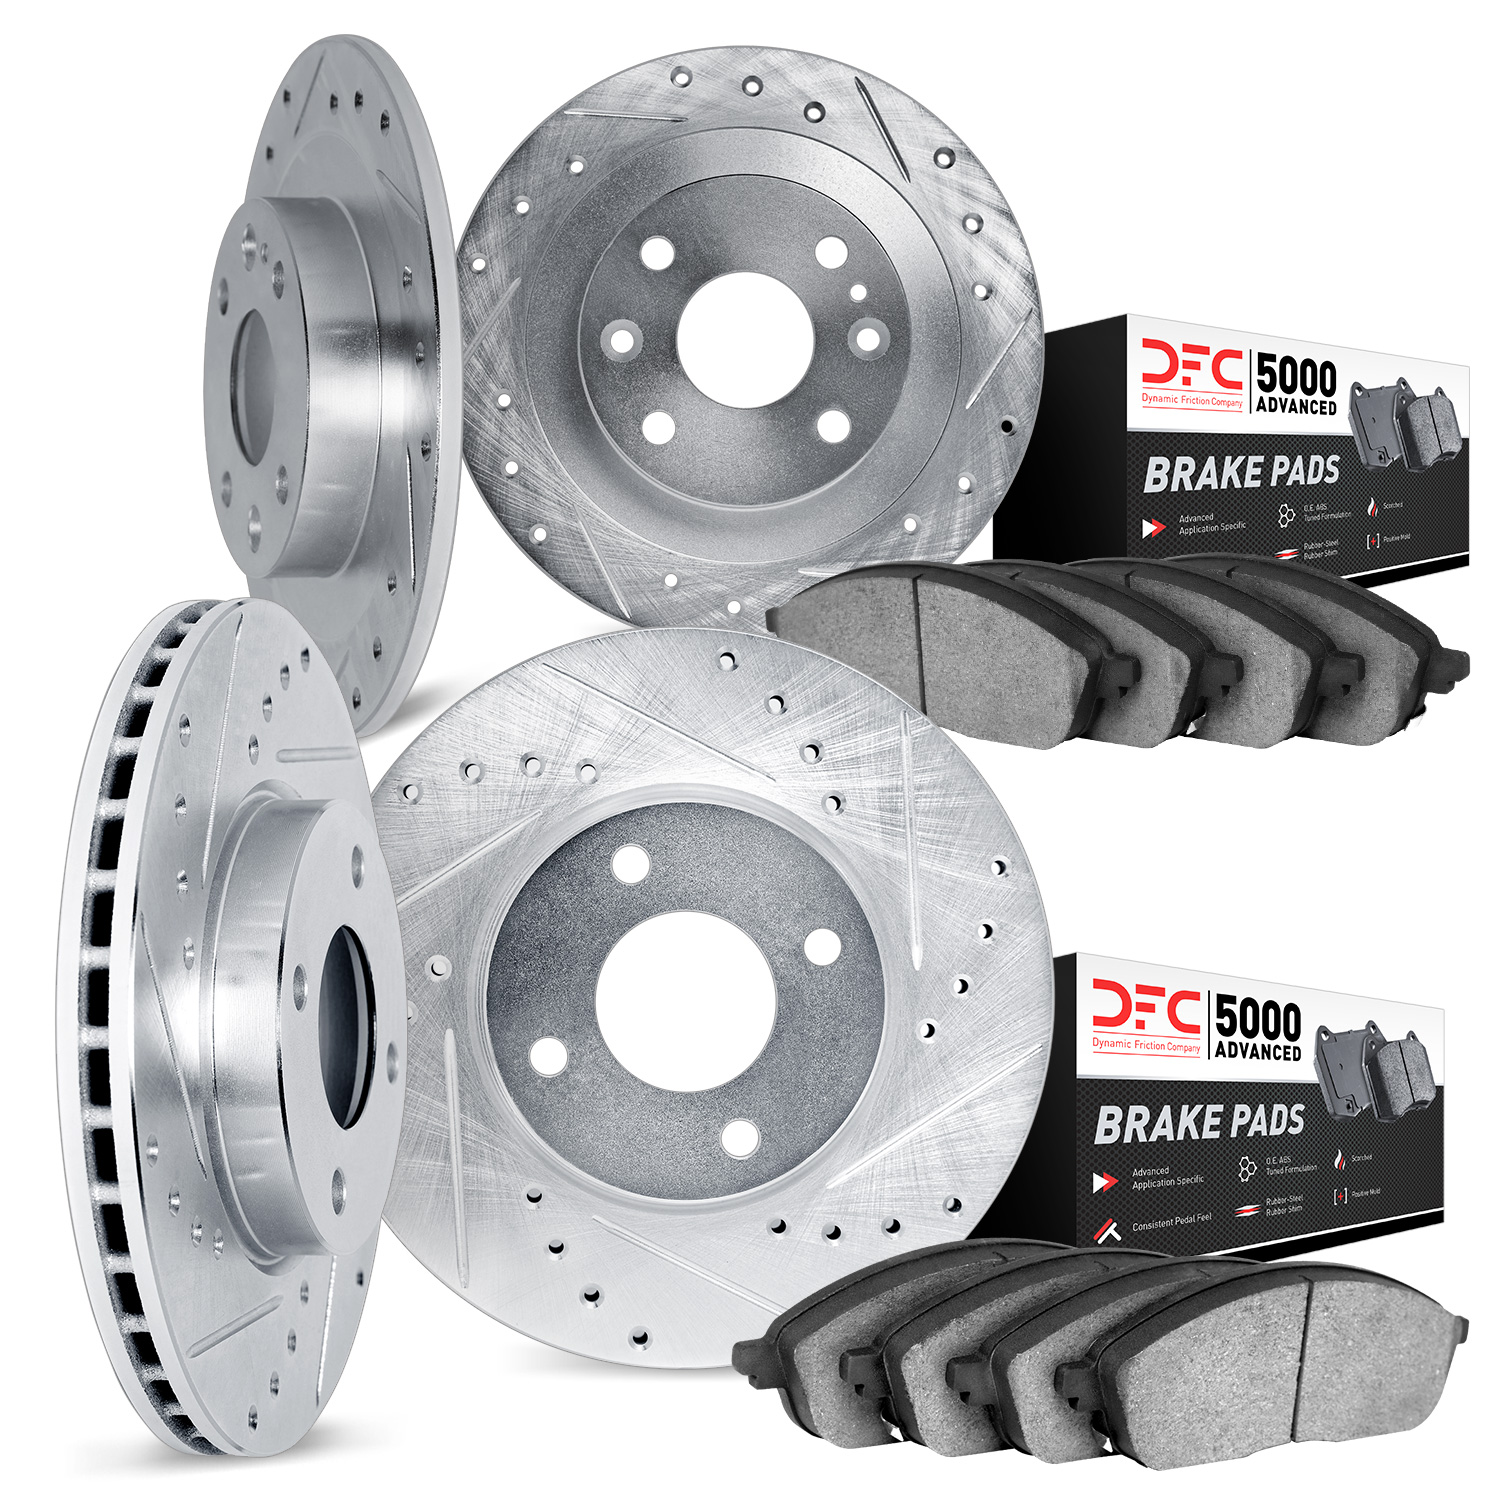 7504-01000 Drilled/Slotted Brake Rotors w/5000 Advanced Brake Pads Kit [Silver], 1989-1994 Suzuki, Position: Front and Rear